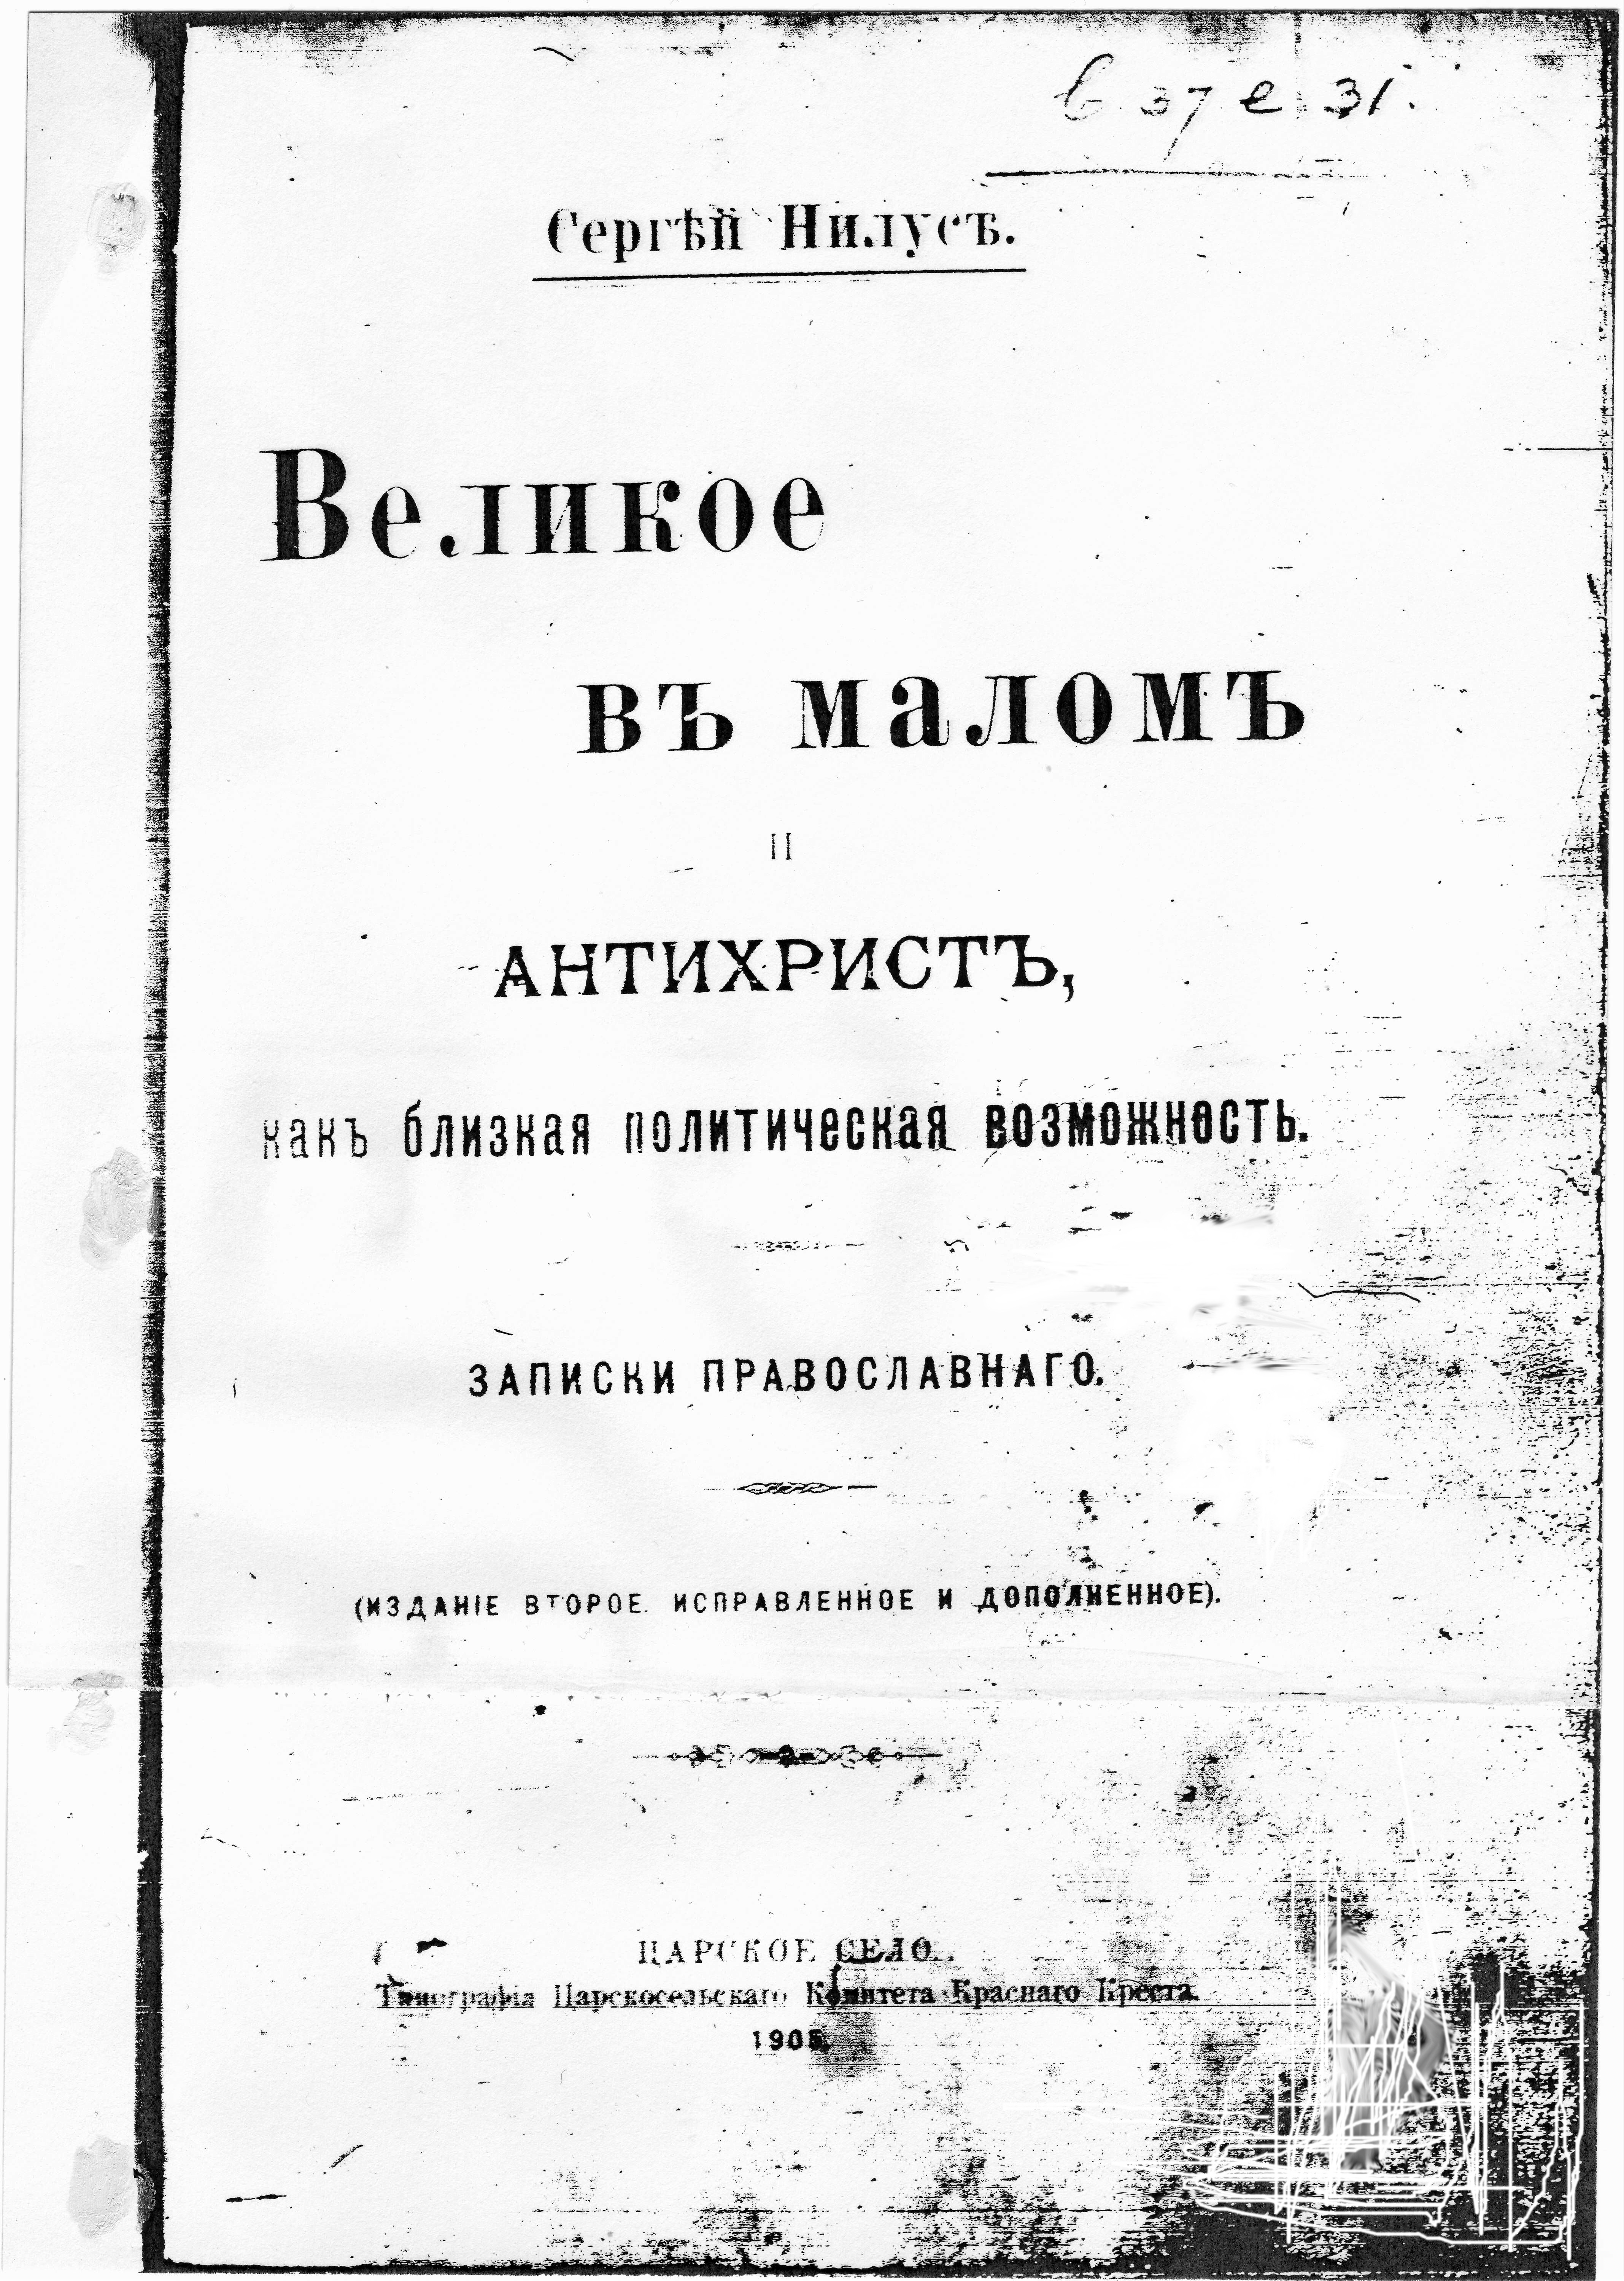 Title page of Serge Nilus' book 'Velikoe v Malom' (The Great within the Minuscule and Antichrist —Protocols of Zion, Russia, 1905, First Published 1903).